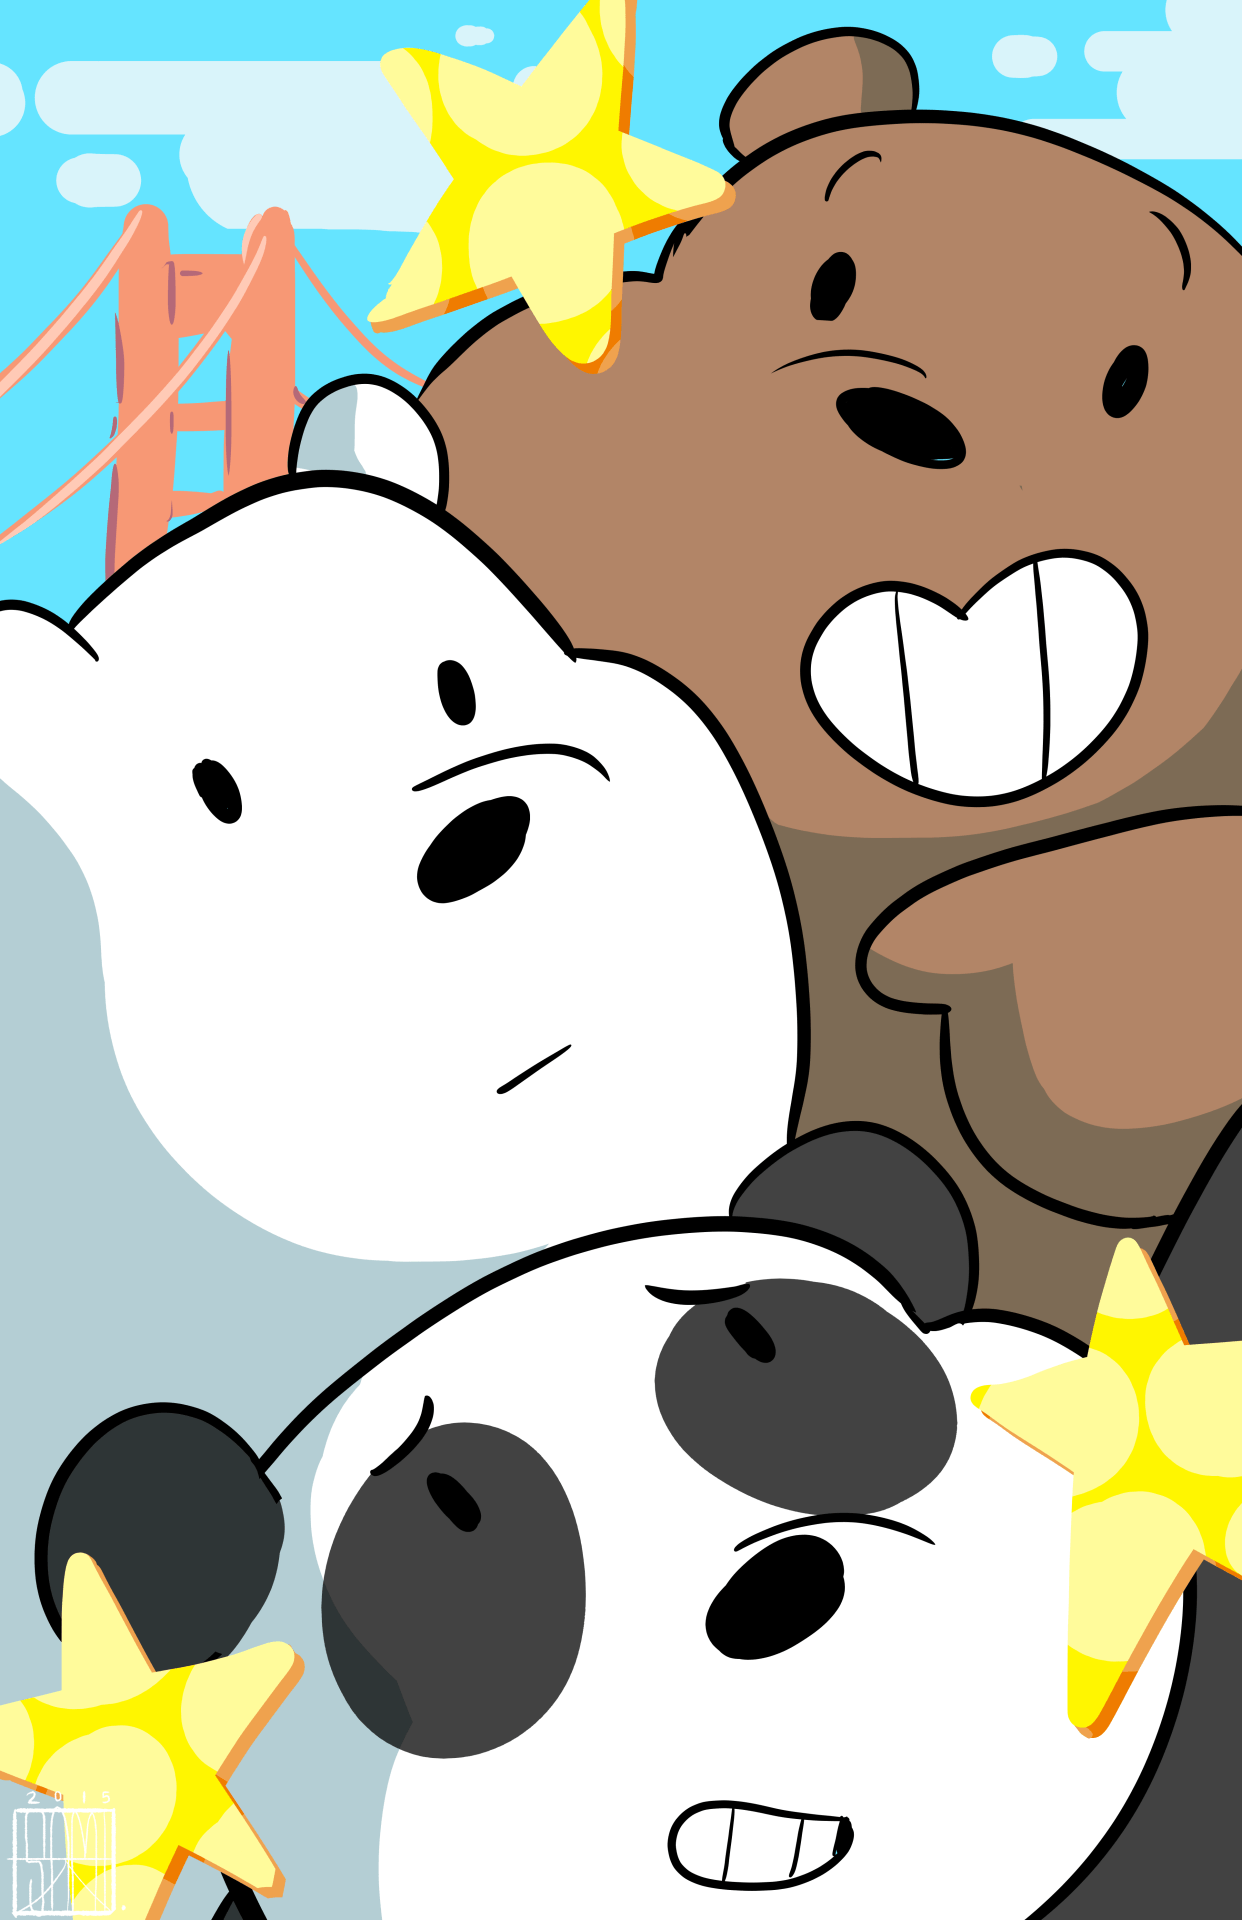 47 Bears Wallpaper Foto We Bare Bears Pics Nation Up To Date The Day In The World In An Image